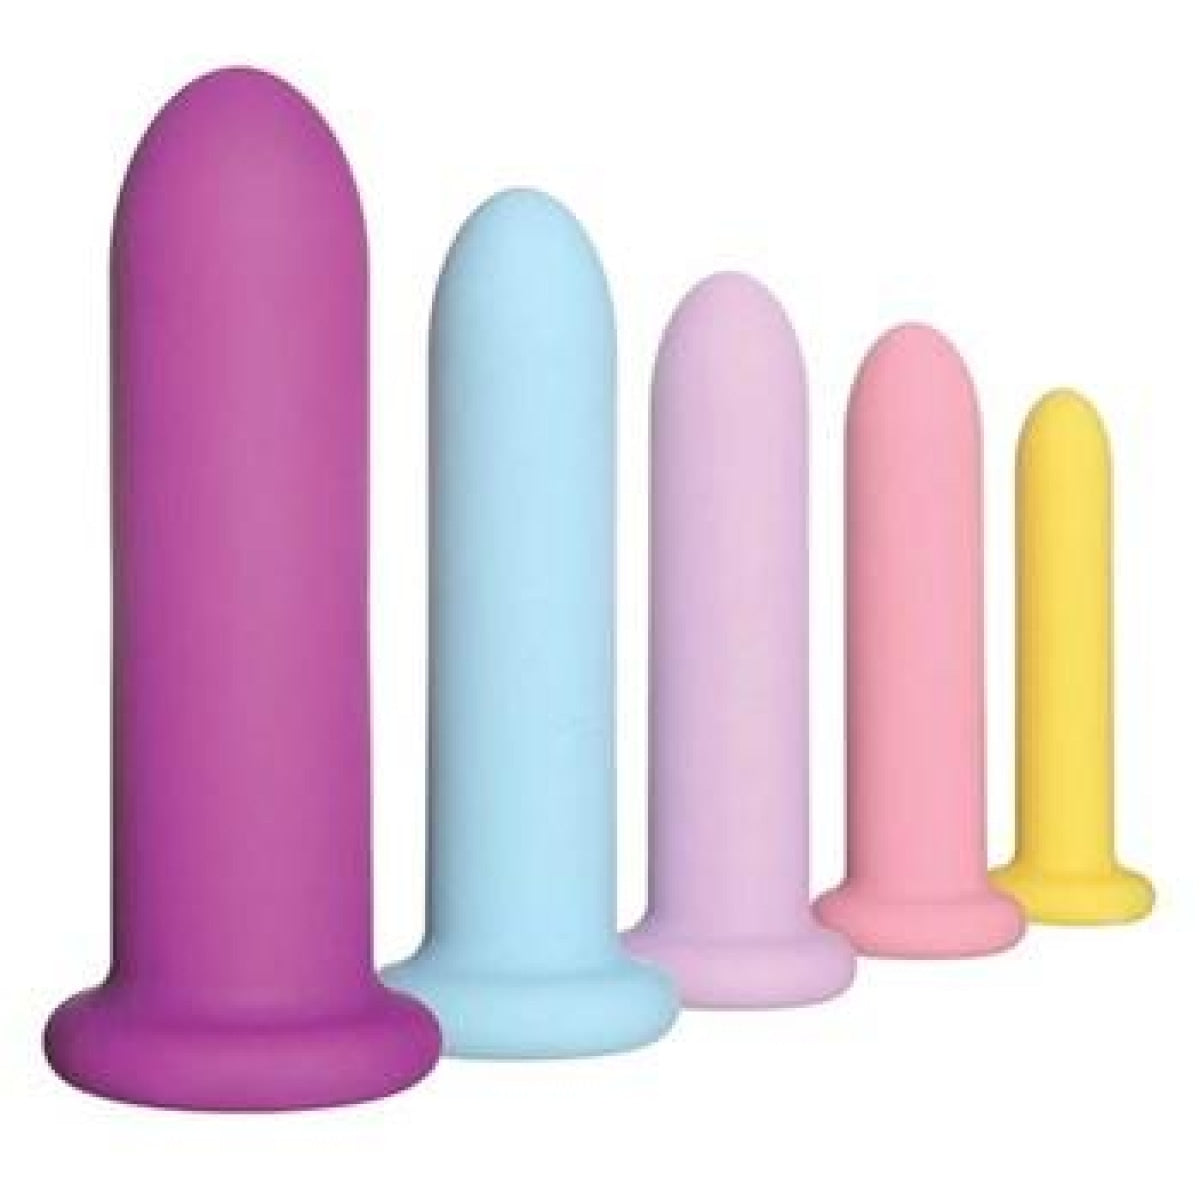 Si Deluxe Silicone Dilator Set Intimates Adult Boutique